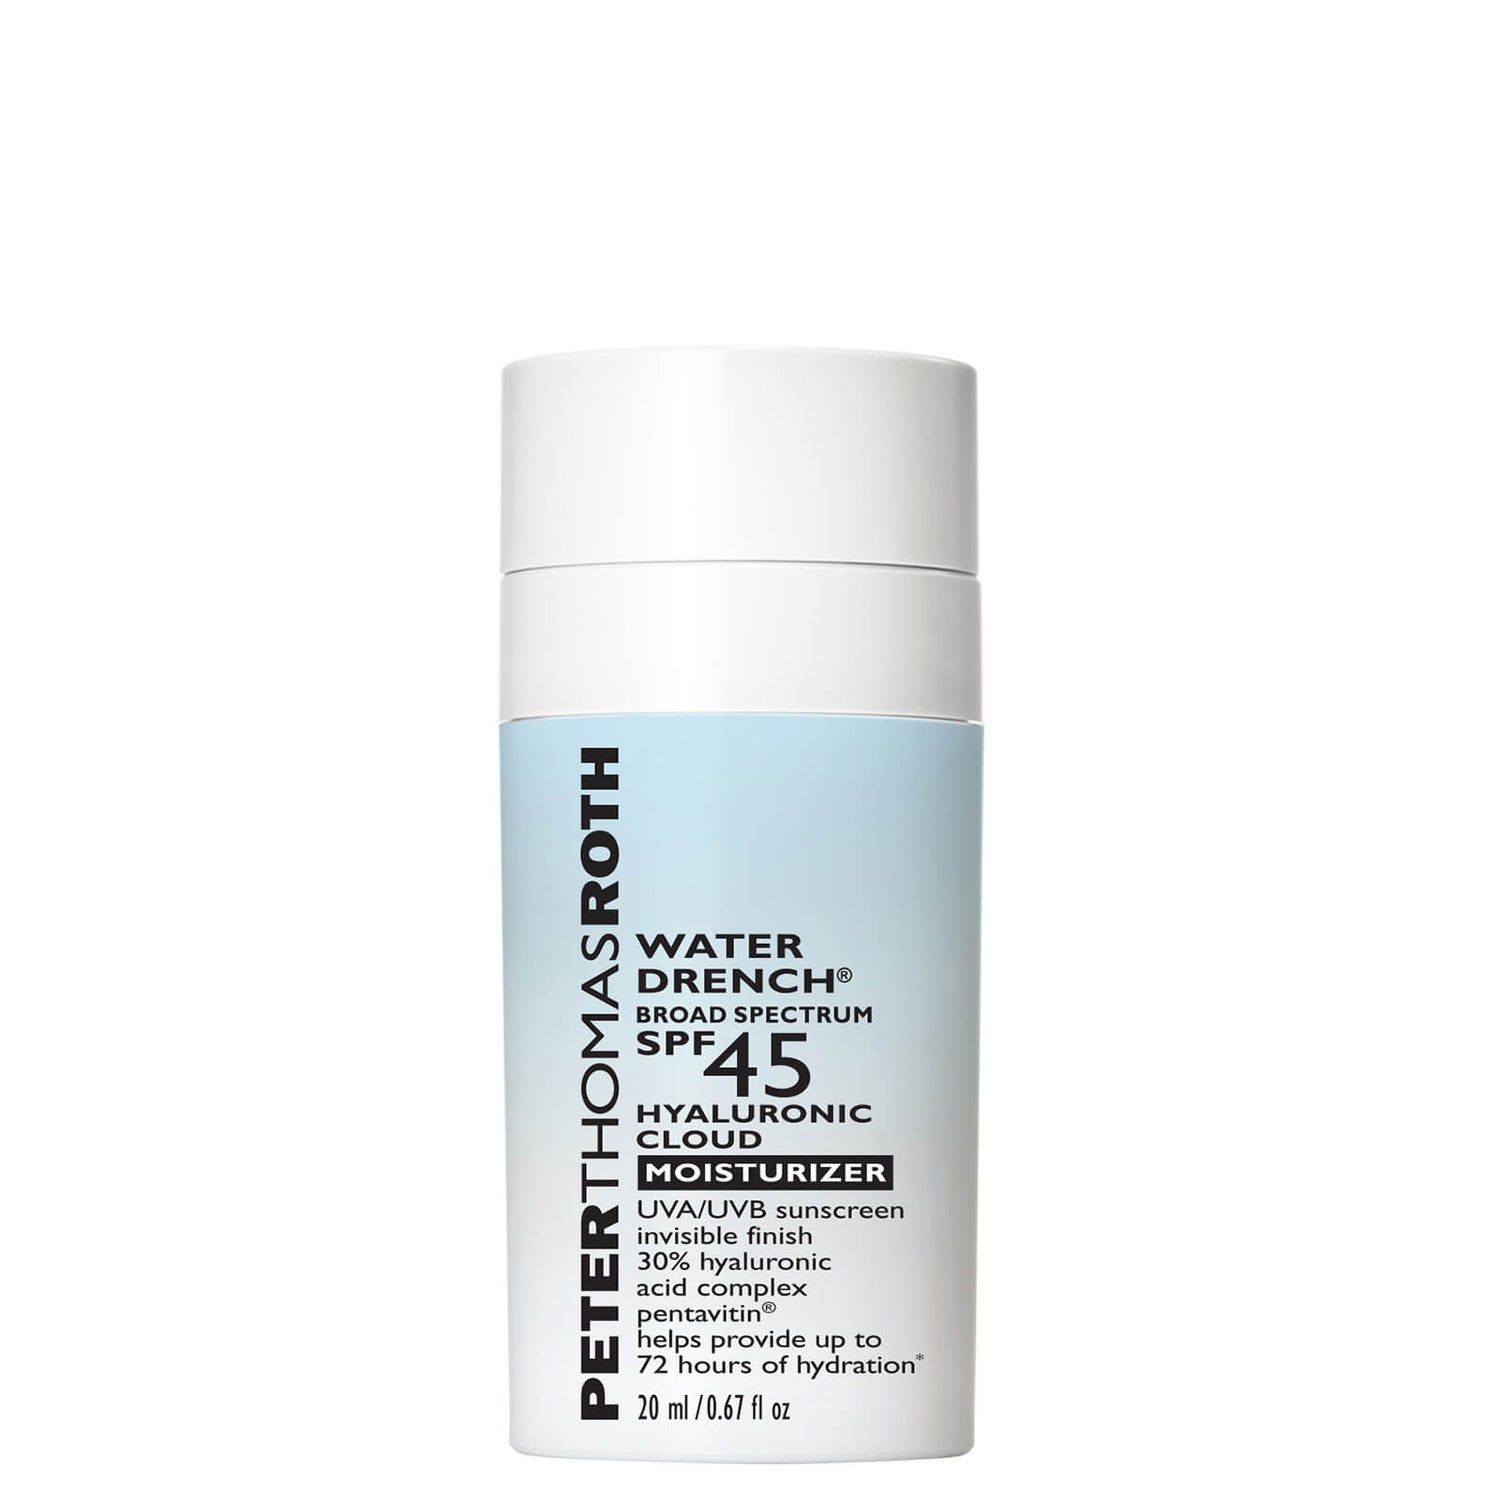 Peter Thomas Roth Water Drench Hyaluronic Cloud Moisturizer Travel Size SPF45 20ml